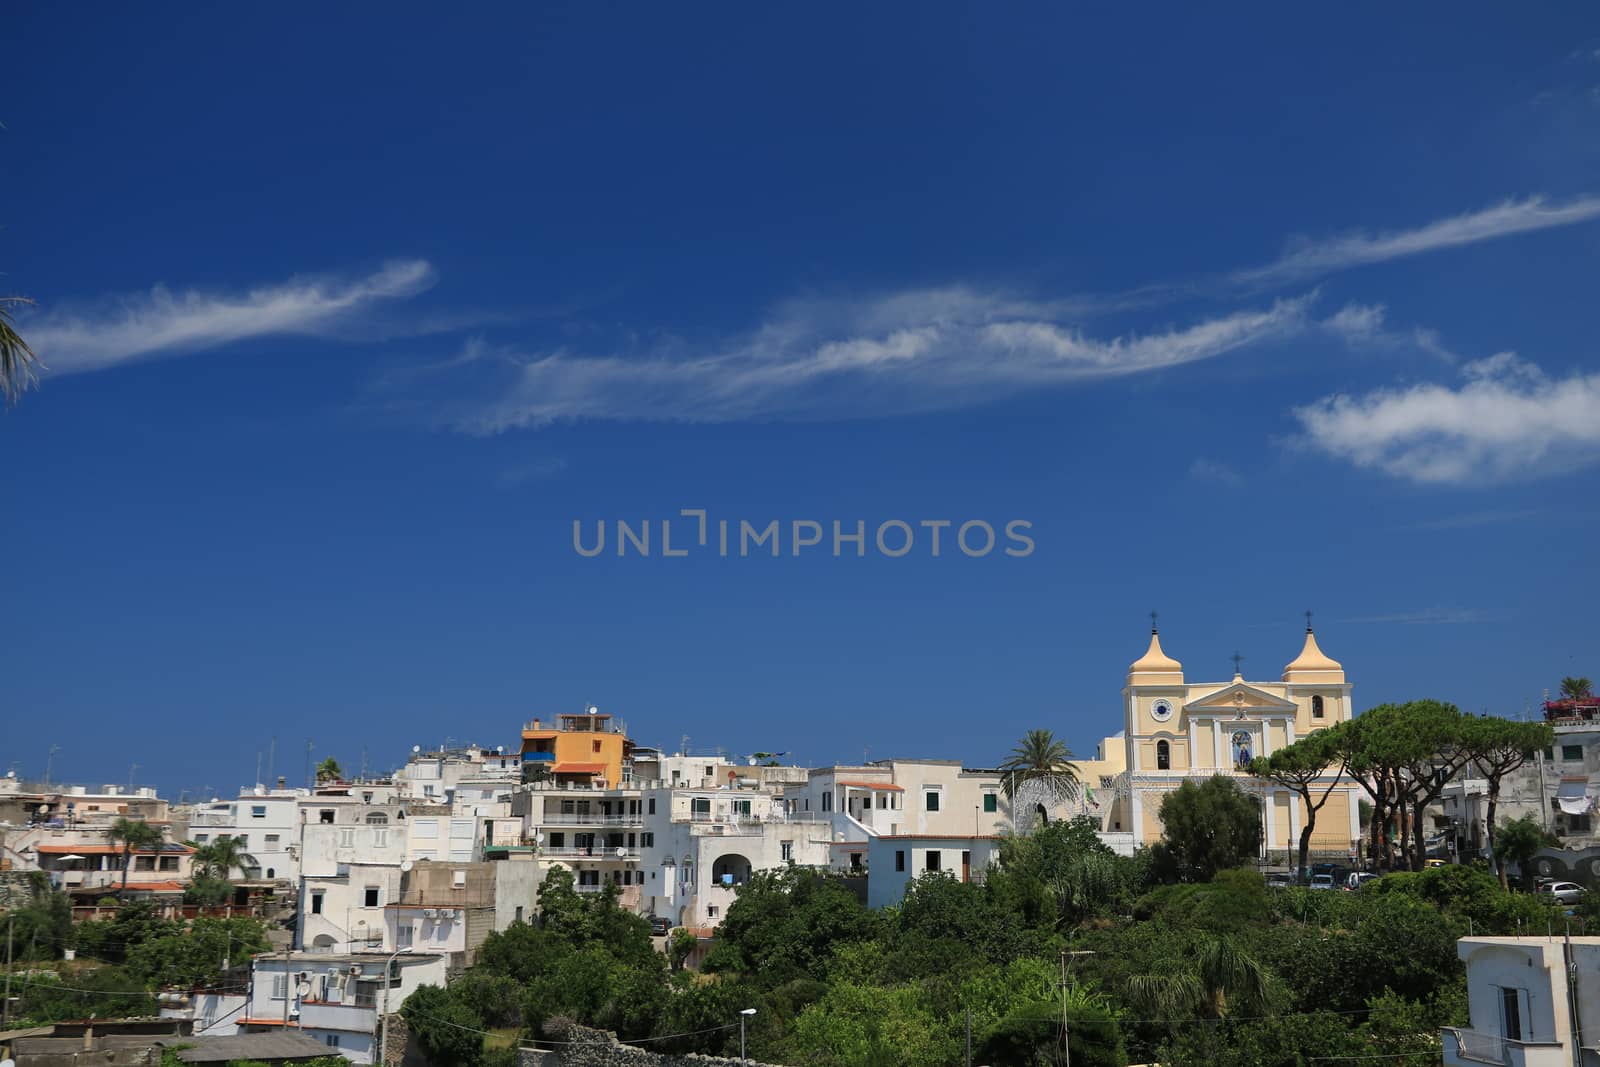 Panorama of the town of Forio d'Ischia, near Naples.  The church of San Vito Martire with the blue sky and clouds in the background.